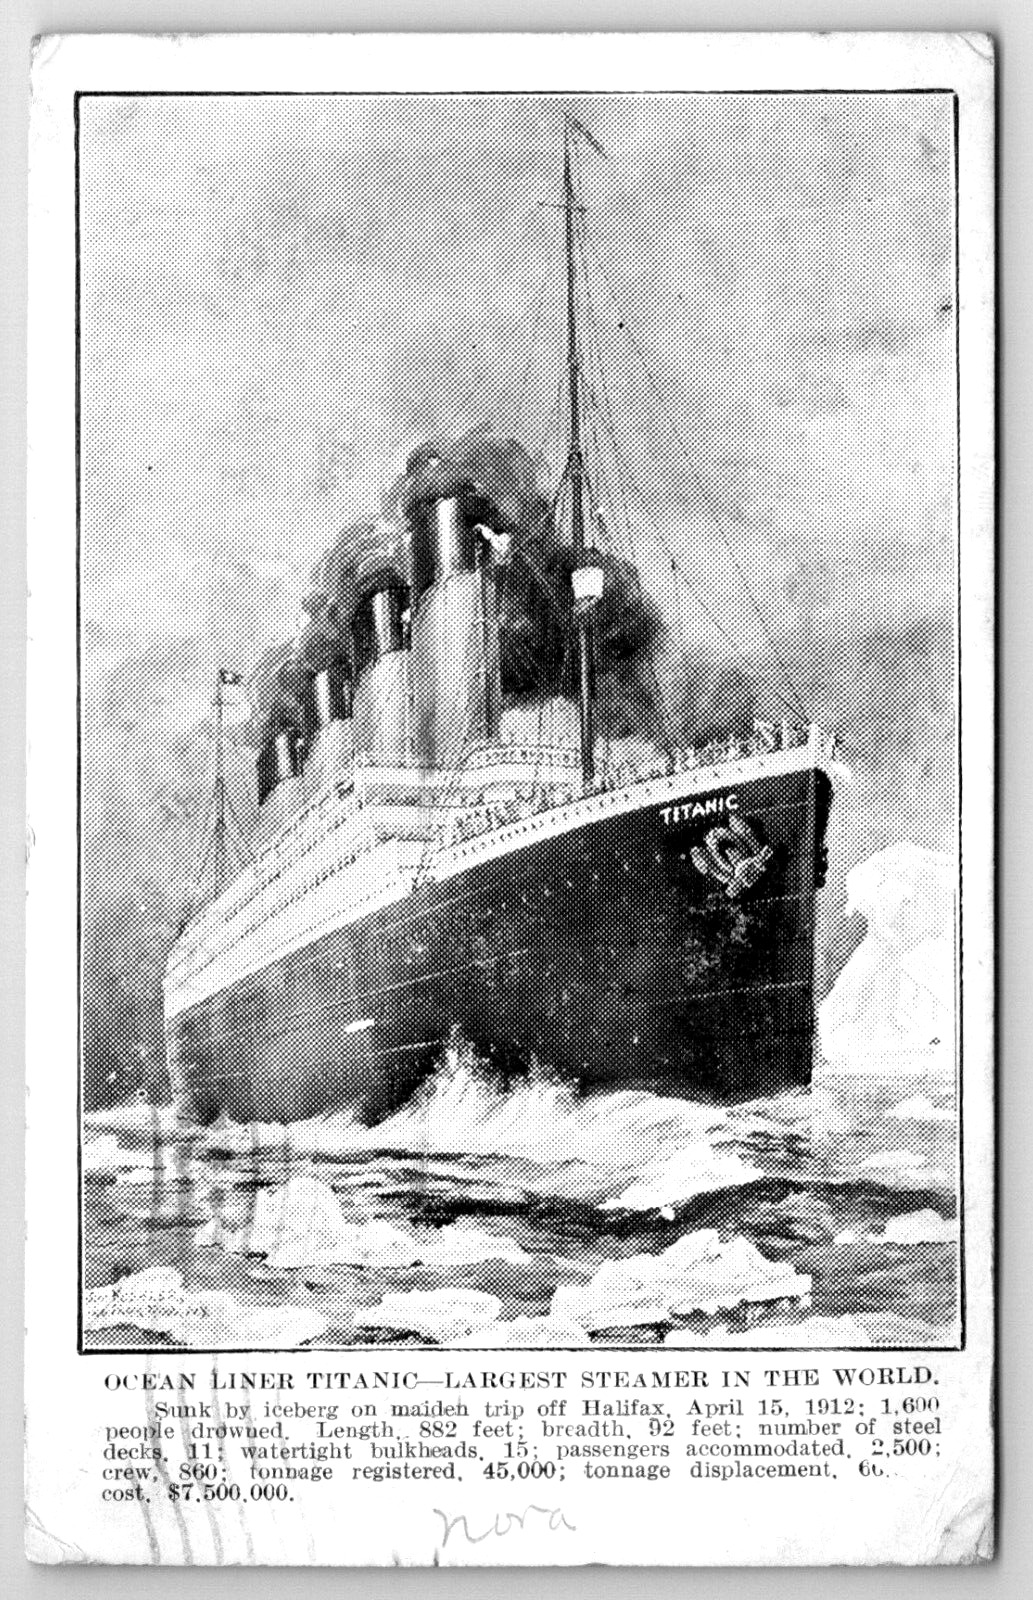 Postcard RMS Titanic Largest Steamer in the World August 1912 Postmark CuSh